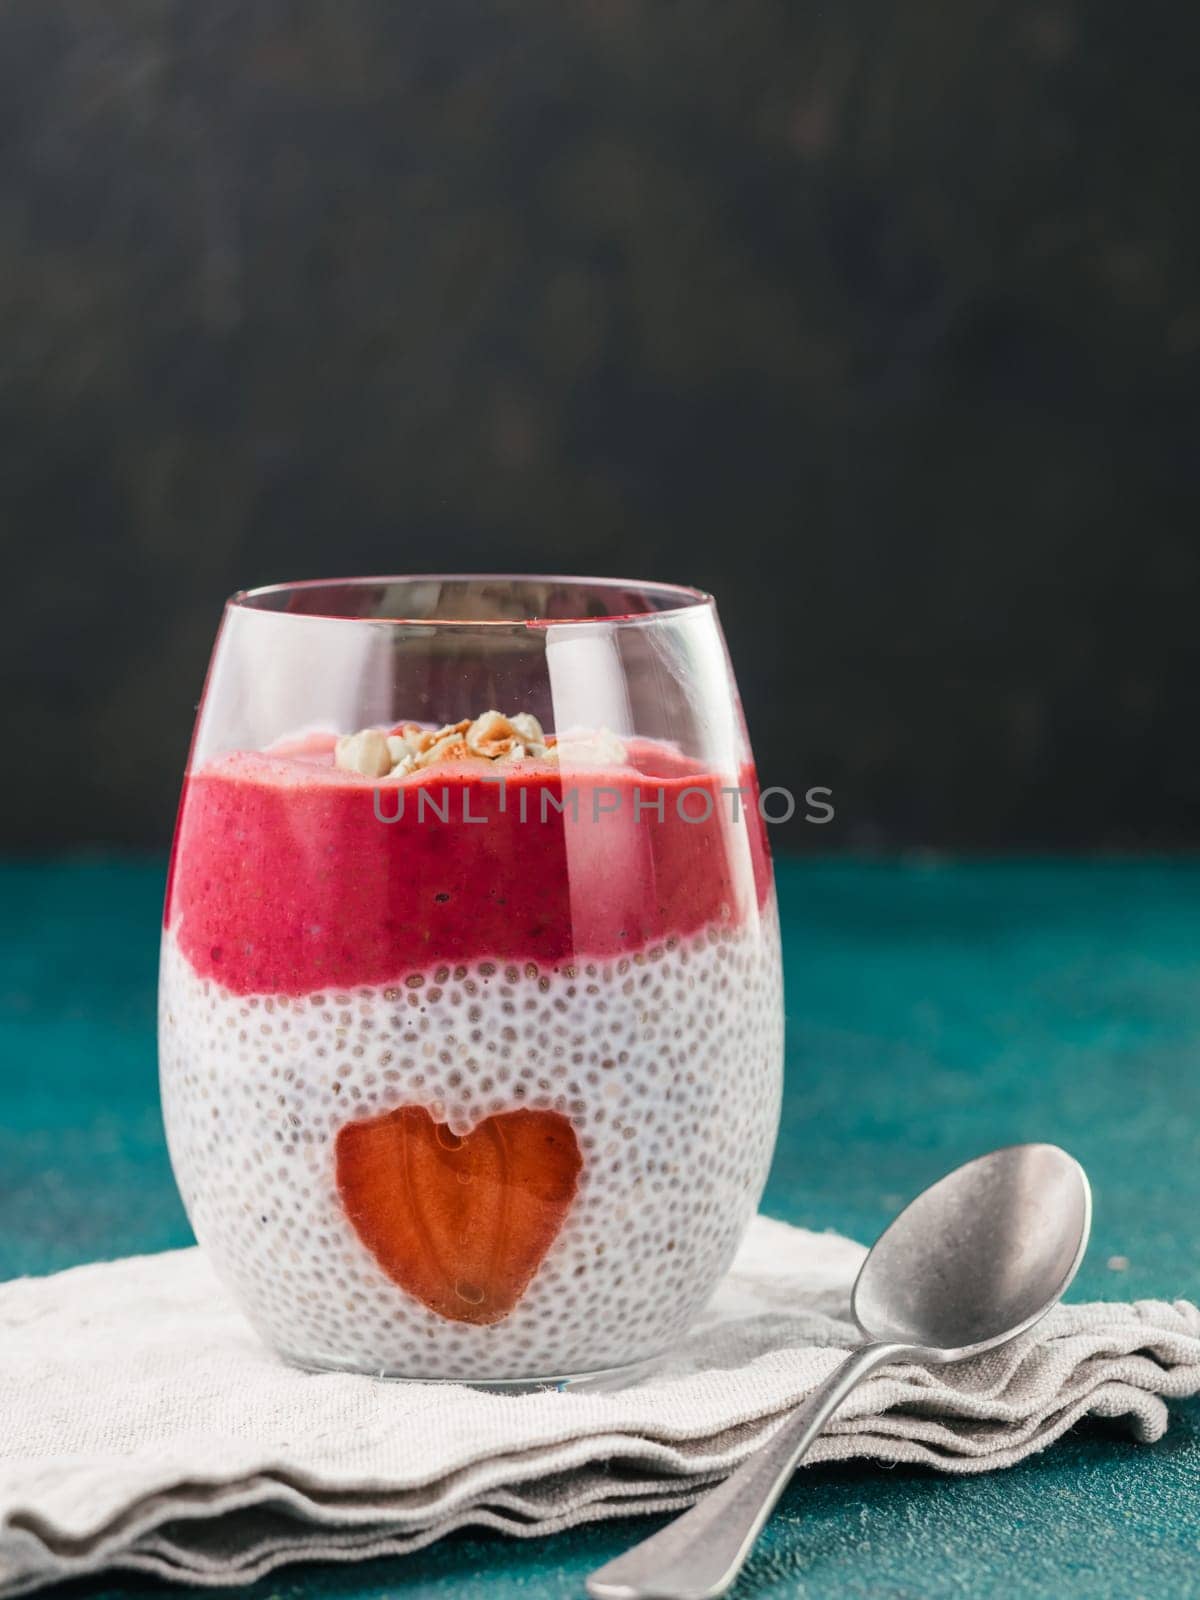 Idea for healthy breakfast on Valentine's Day: Chia pudding with red berry puree, chopped almonds on top and strawberry in the shape of heart. Copy space for text